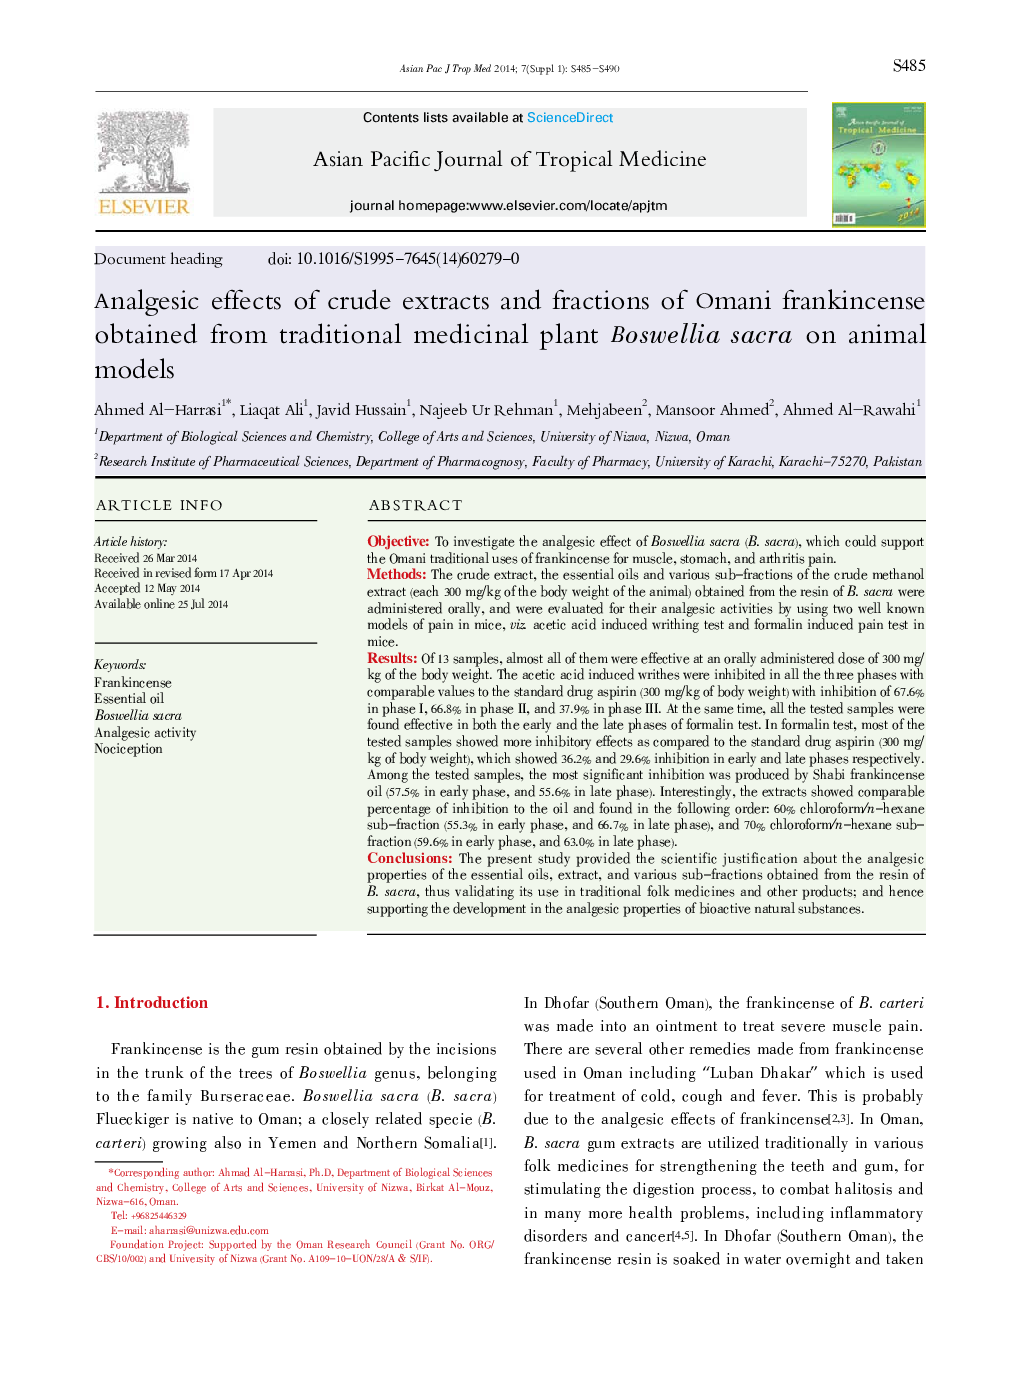 Analgesic effects of crude extracts and fractions of Omani frankincense obtained from traditional medicinal plant Boswellia sacra on animal models 